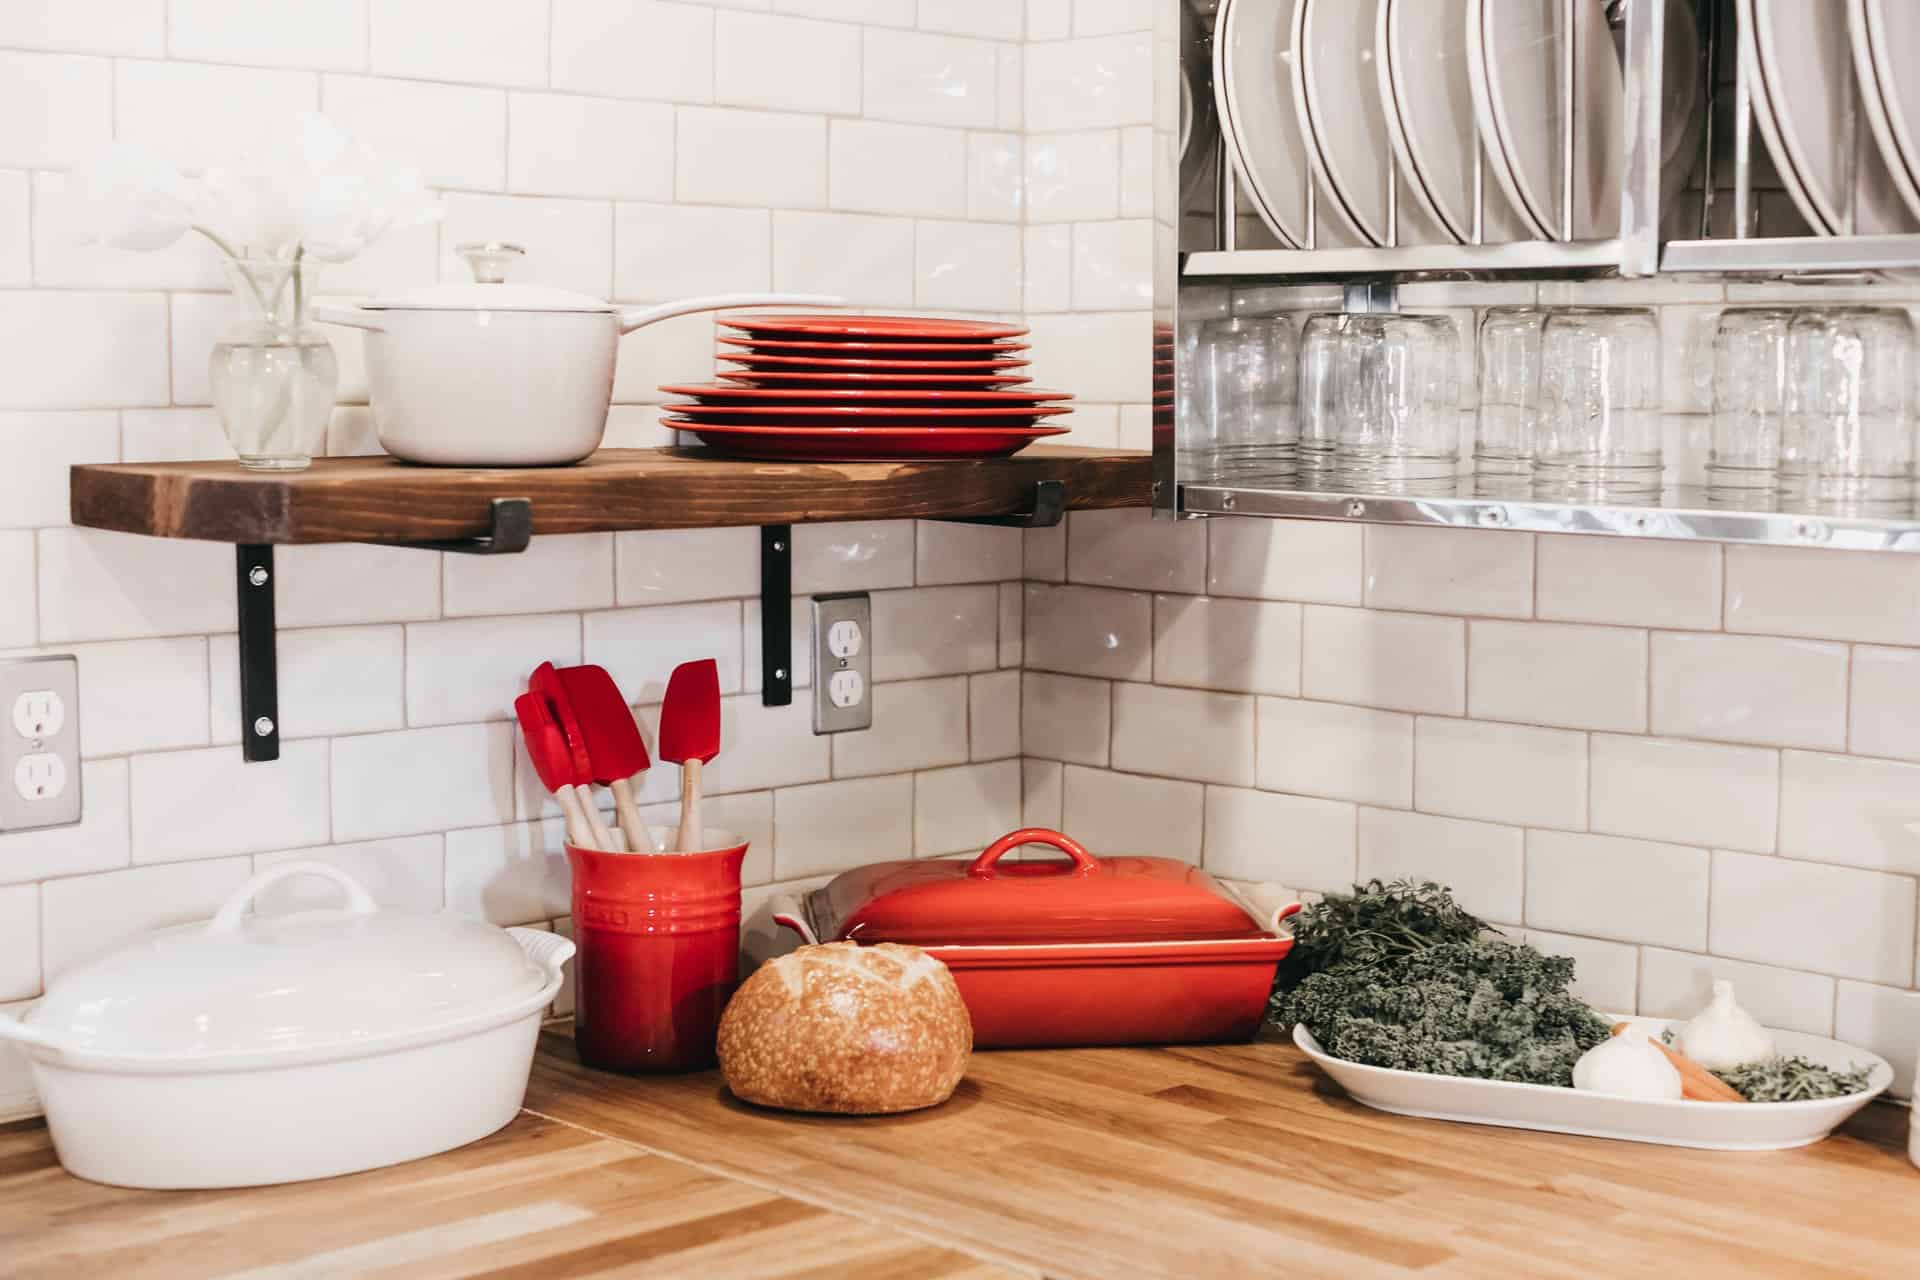 How to Choose the Right Kitchenware for Your Home